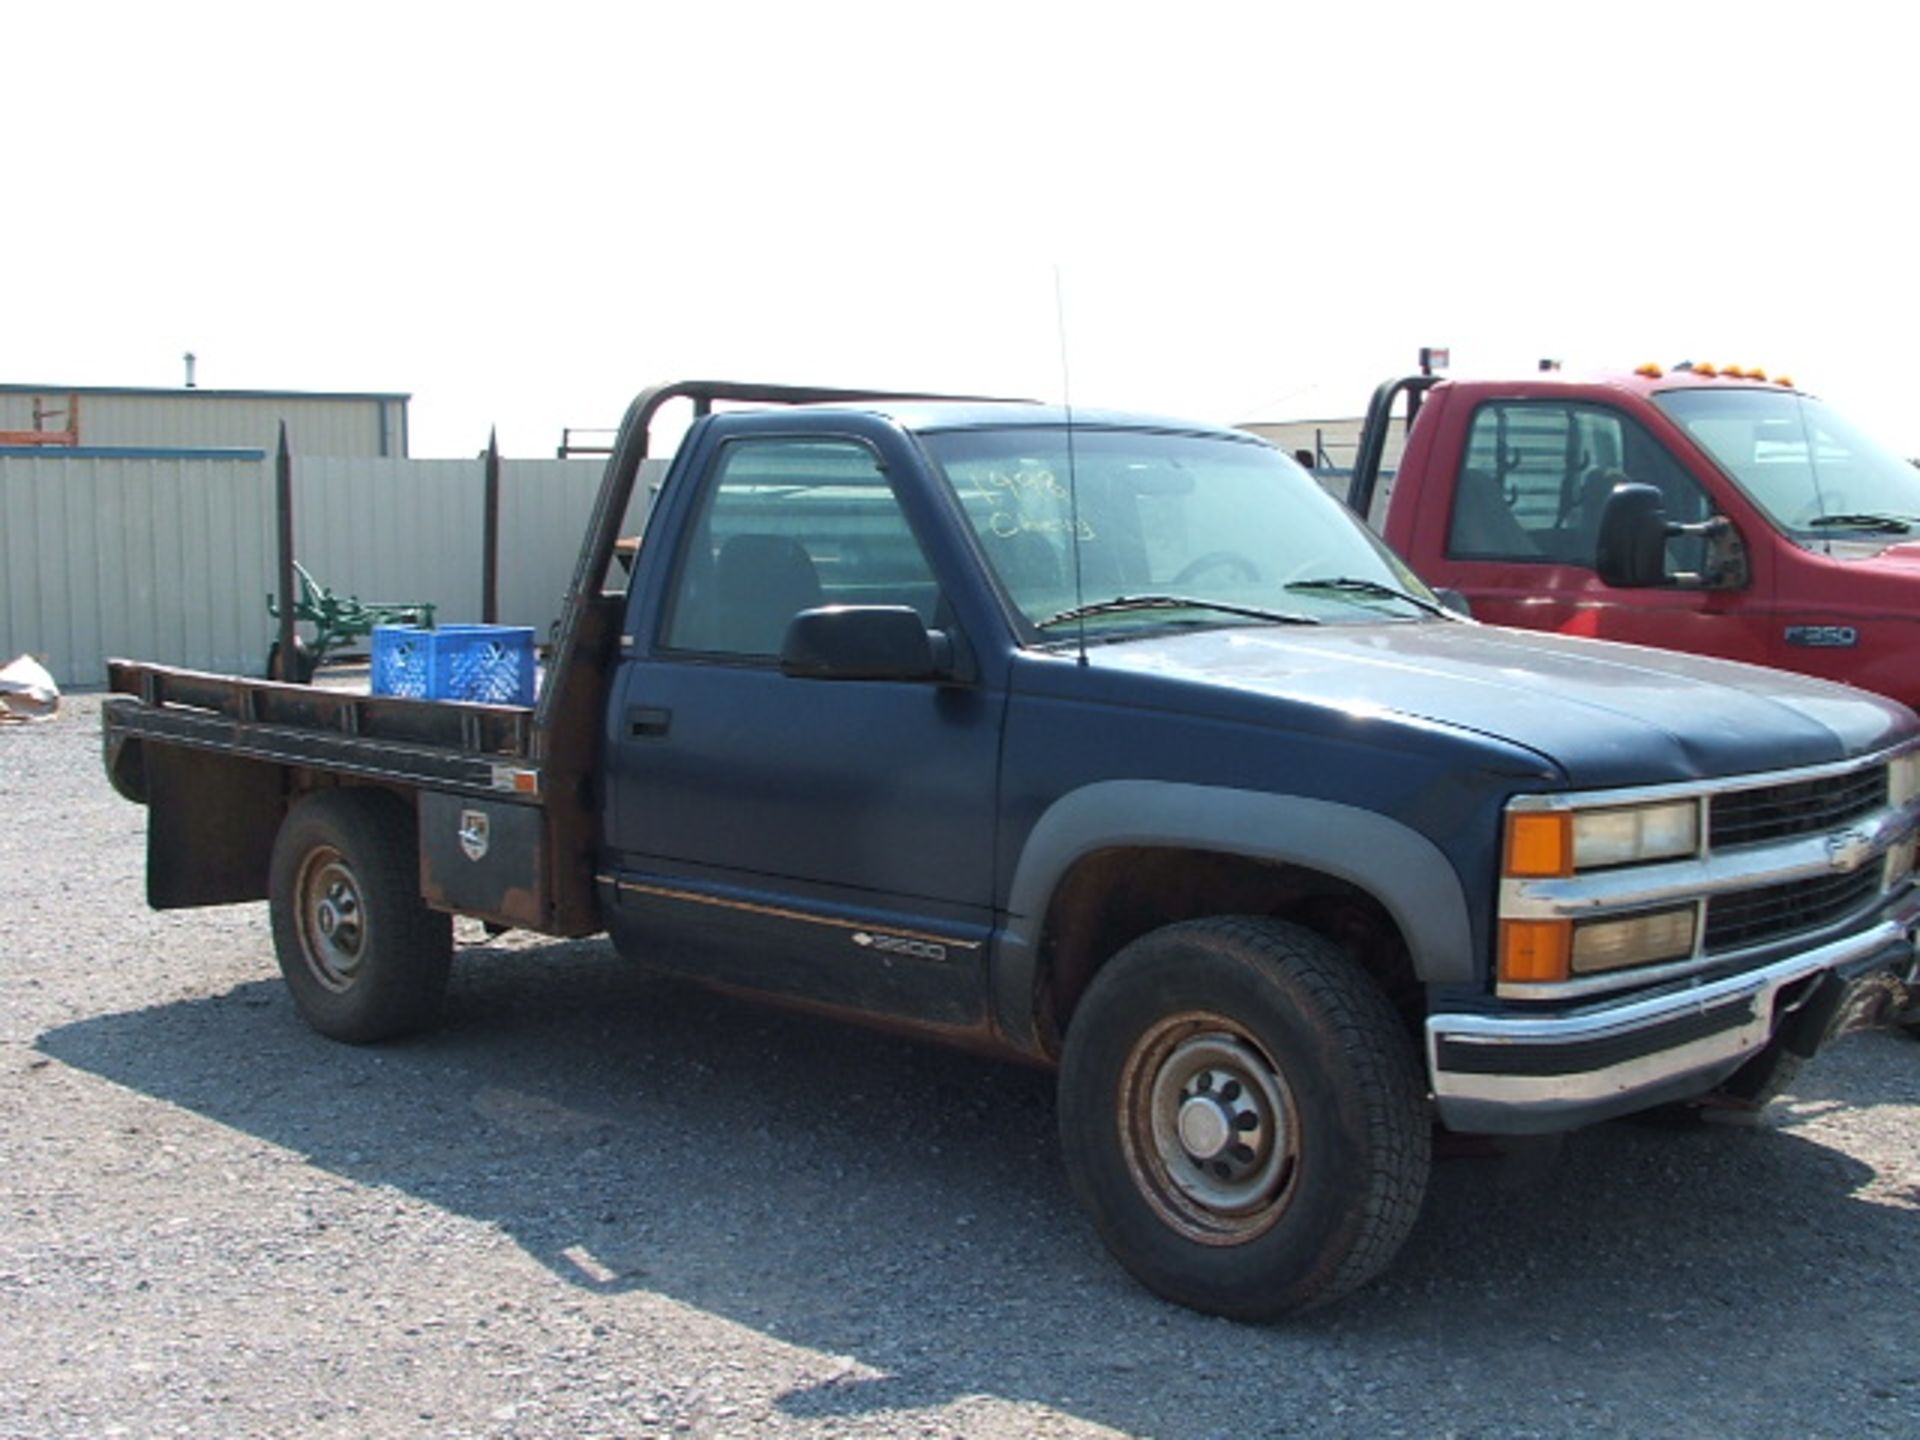 Lot 452 1998 Chevy 3500, 5 Speed, 4WD, W/Butler Bale Bed